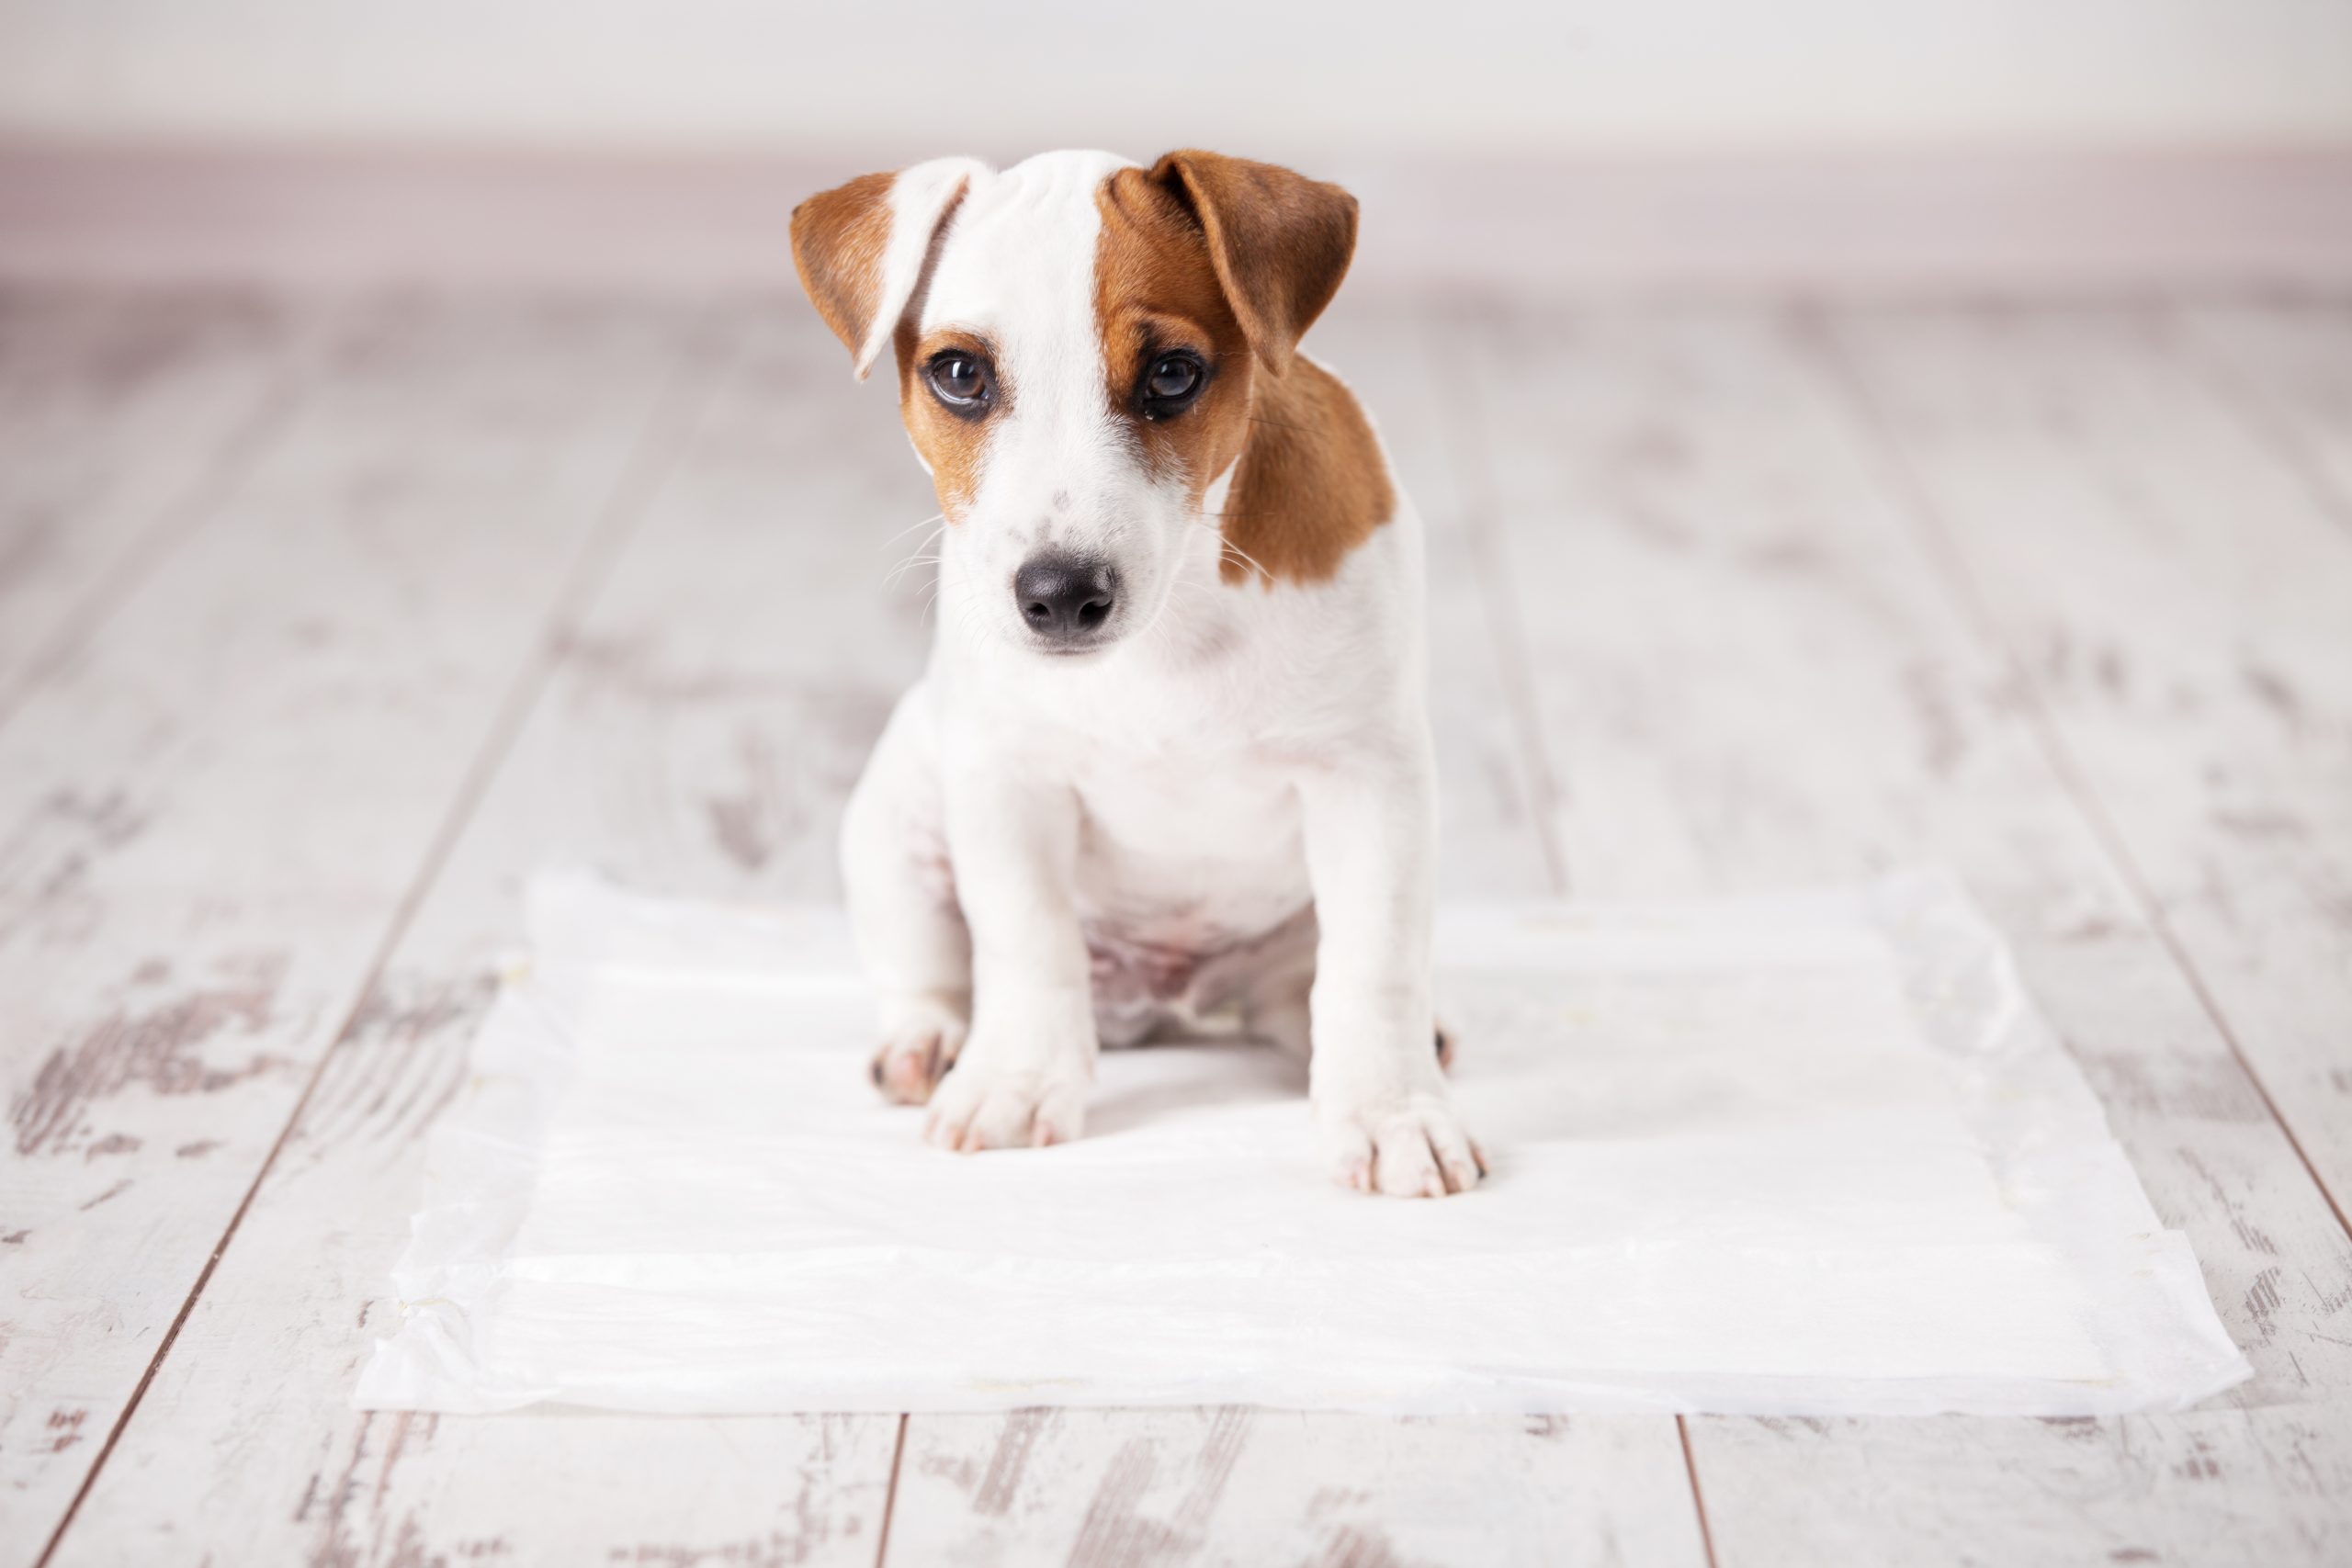 How to potty train your puppy in 7 easy steps